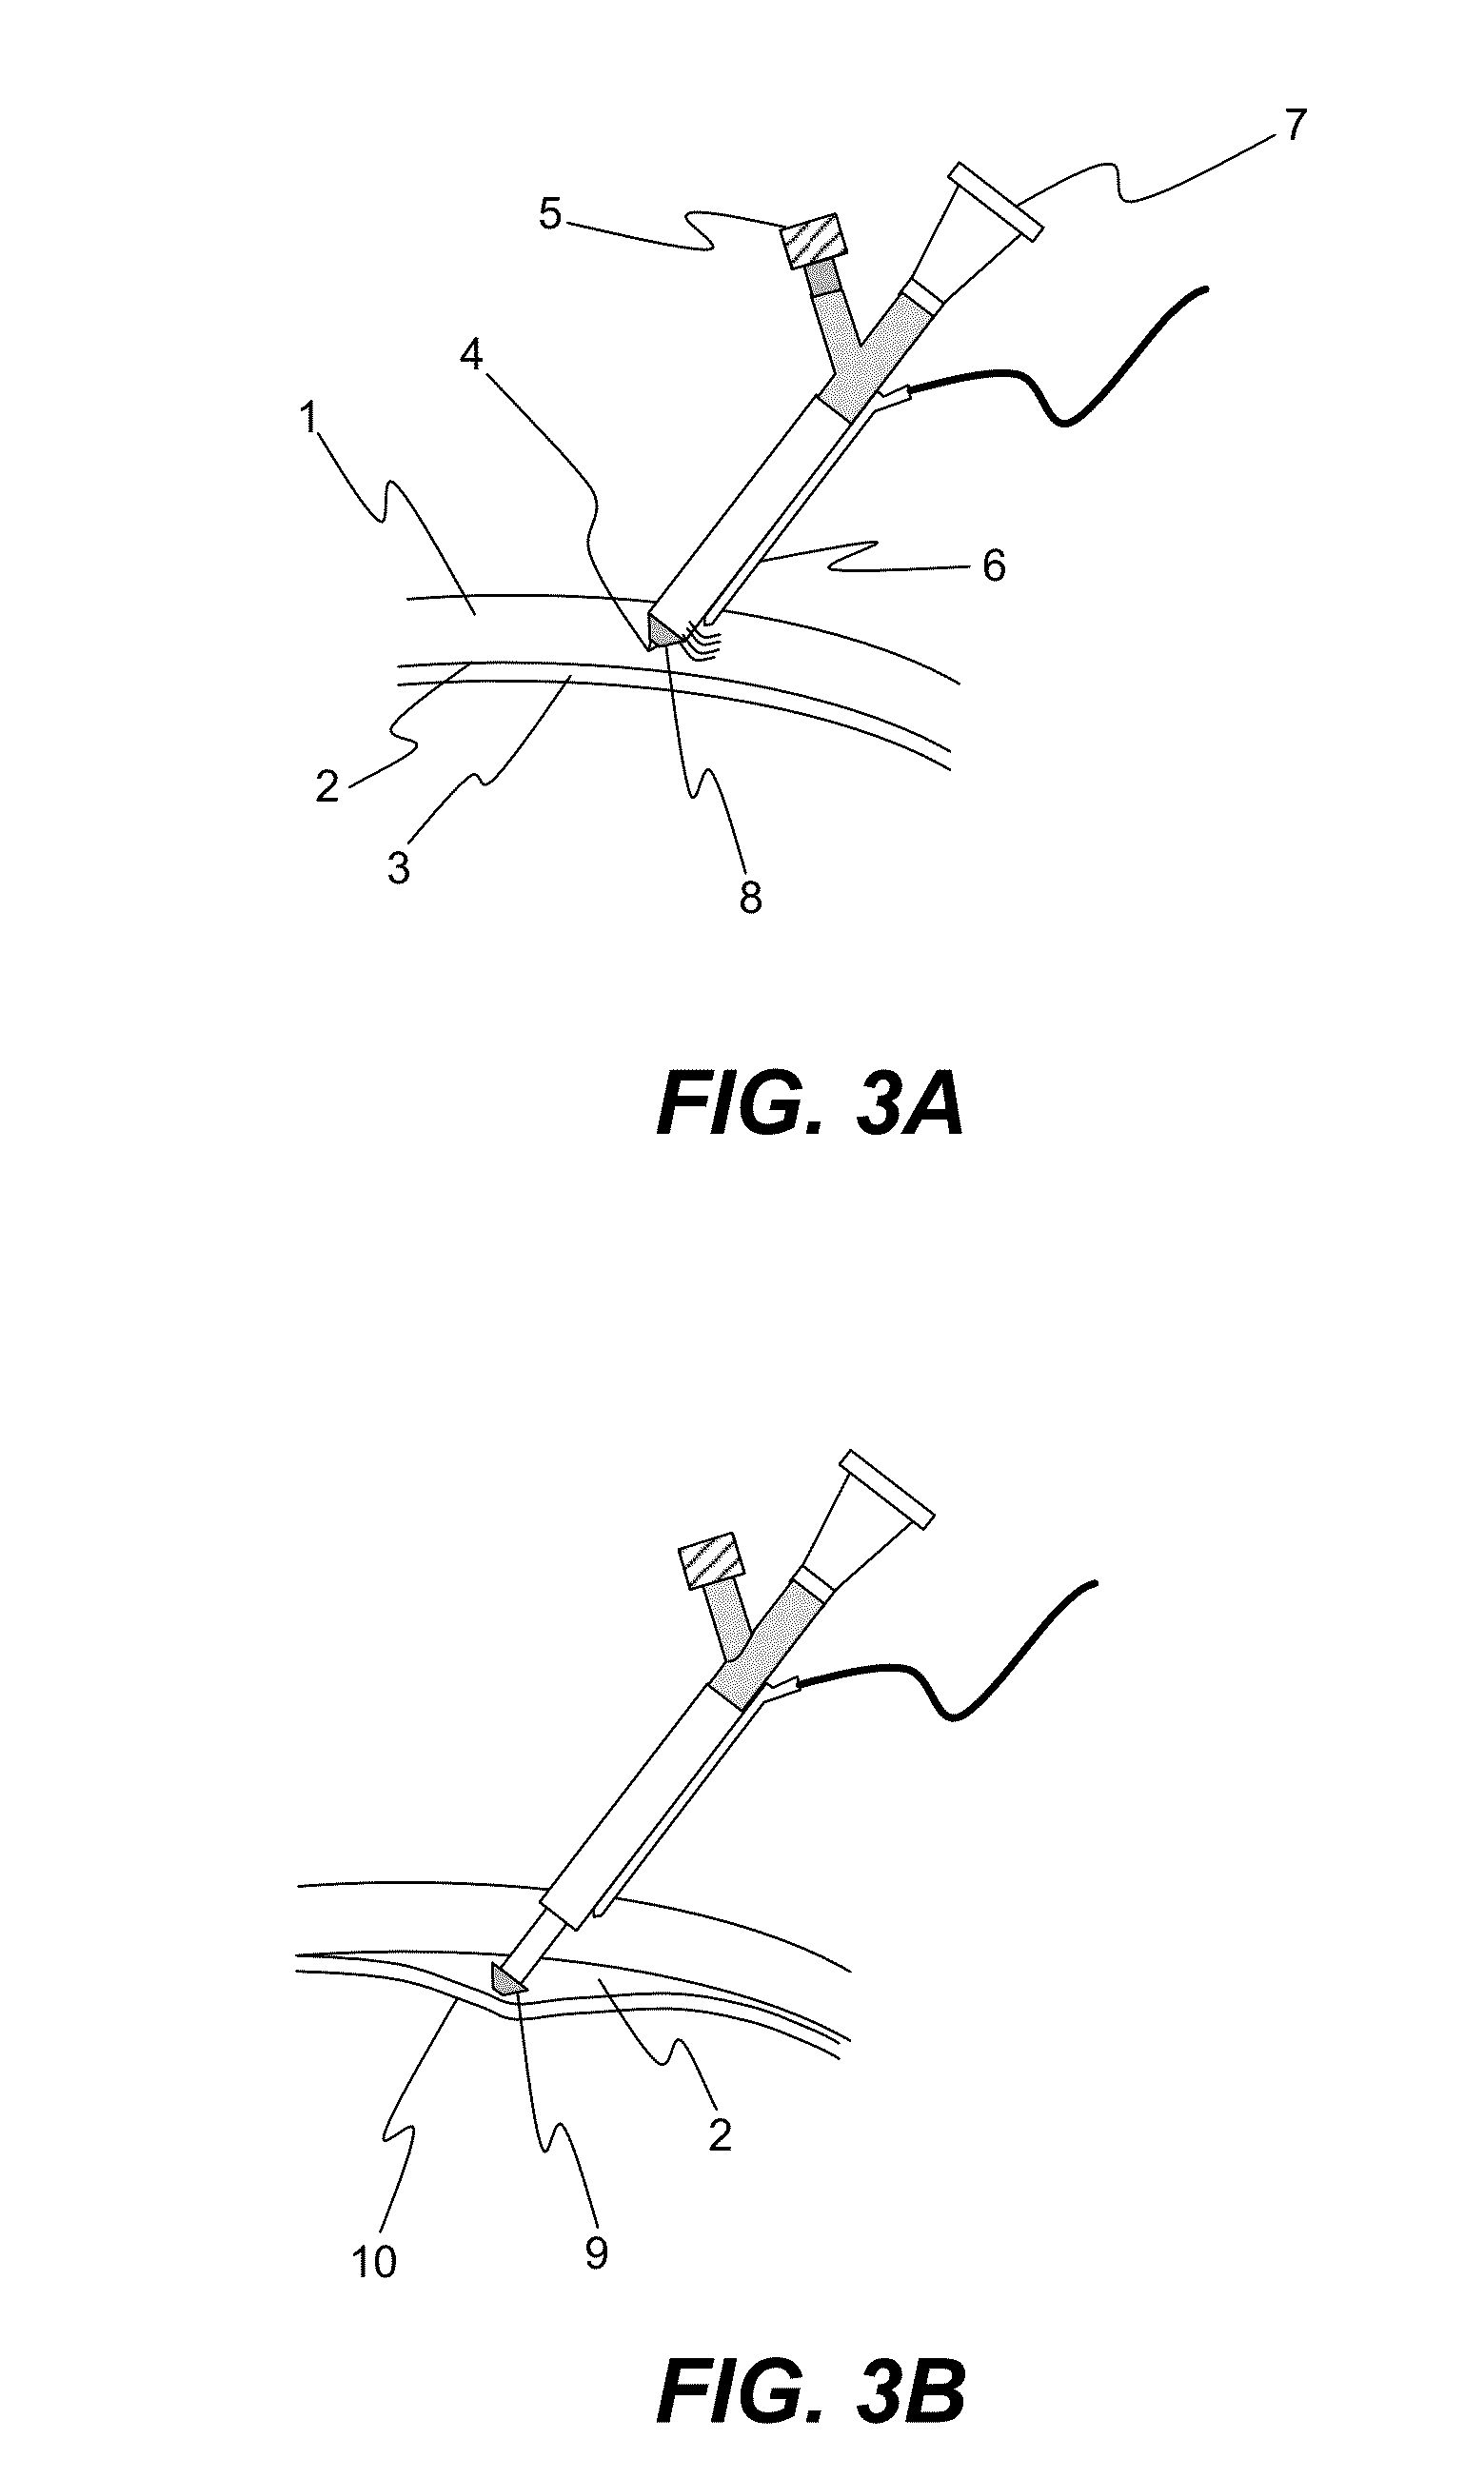 Apparatus and formulations for suprachoridal drug delivery